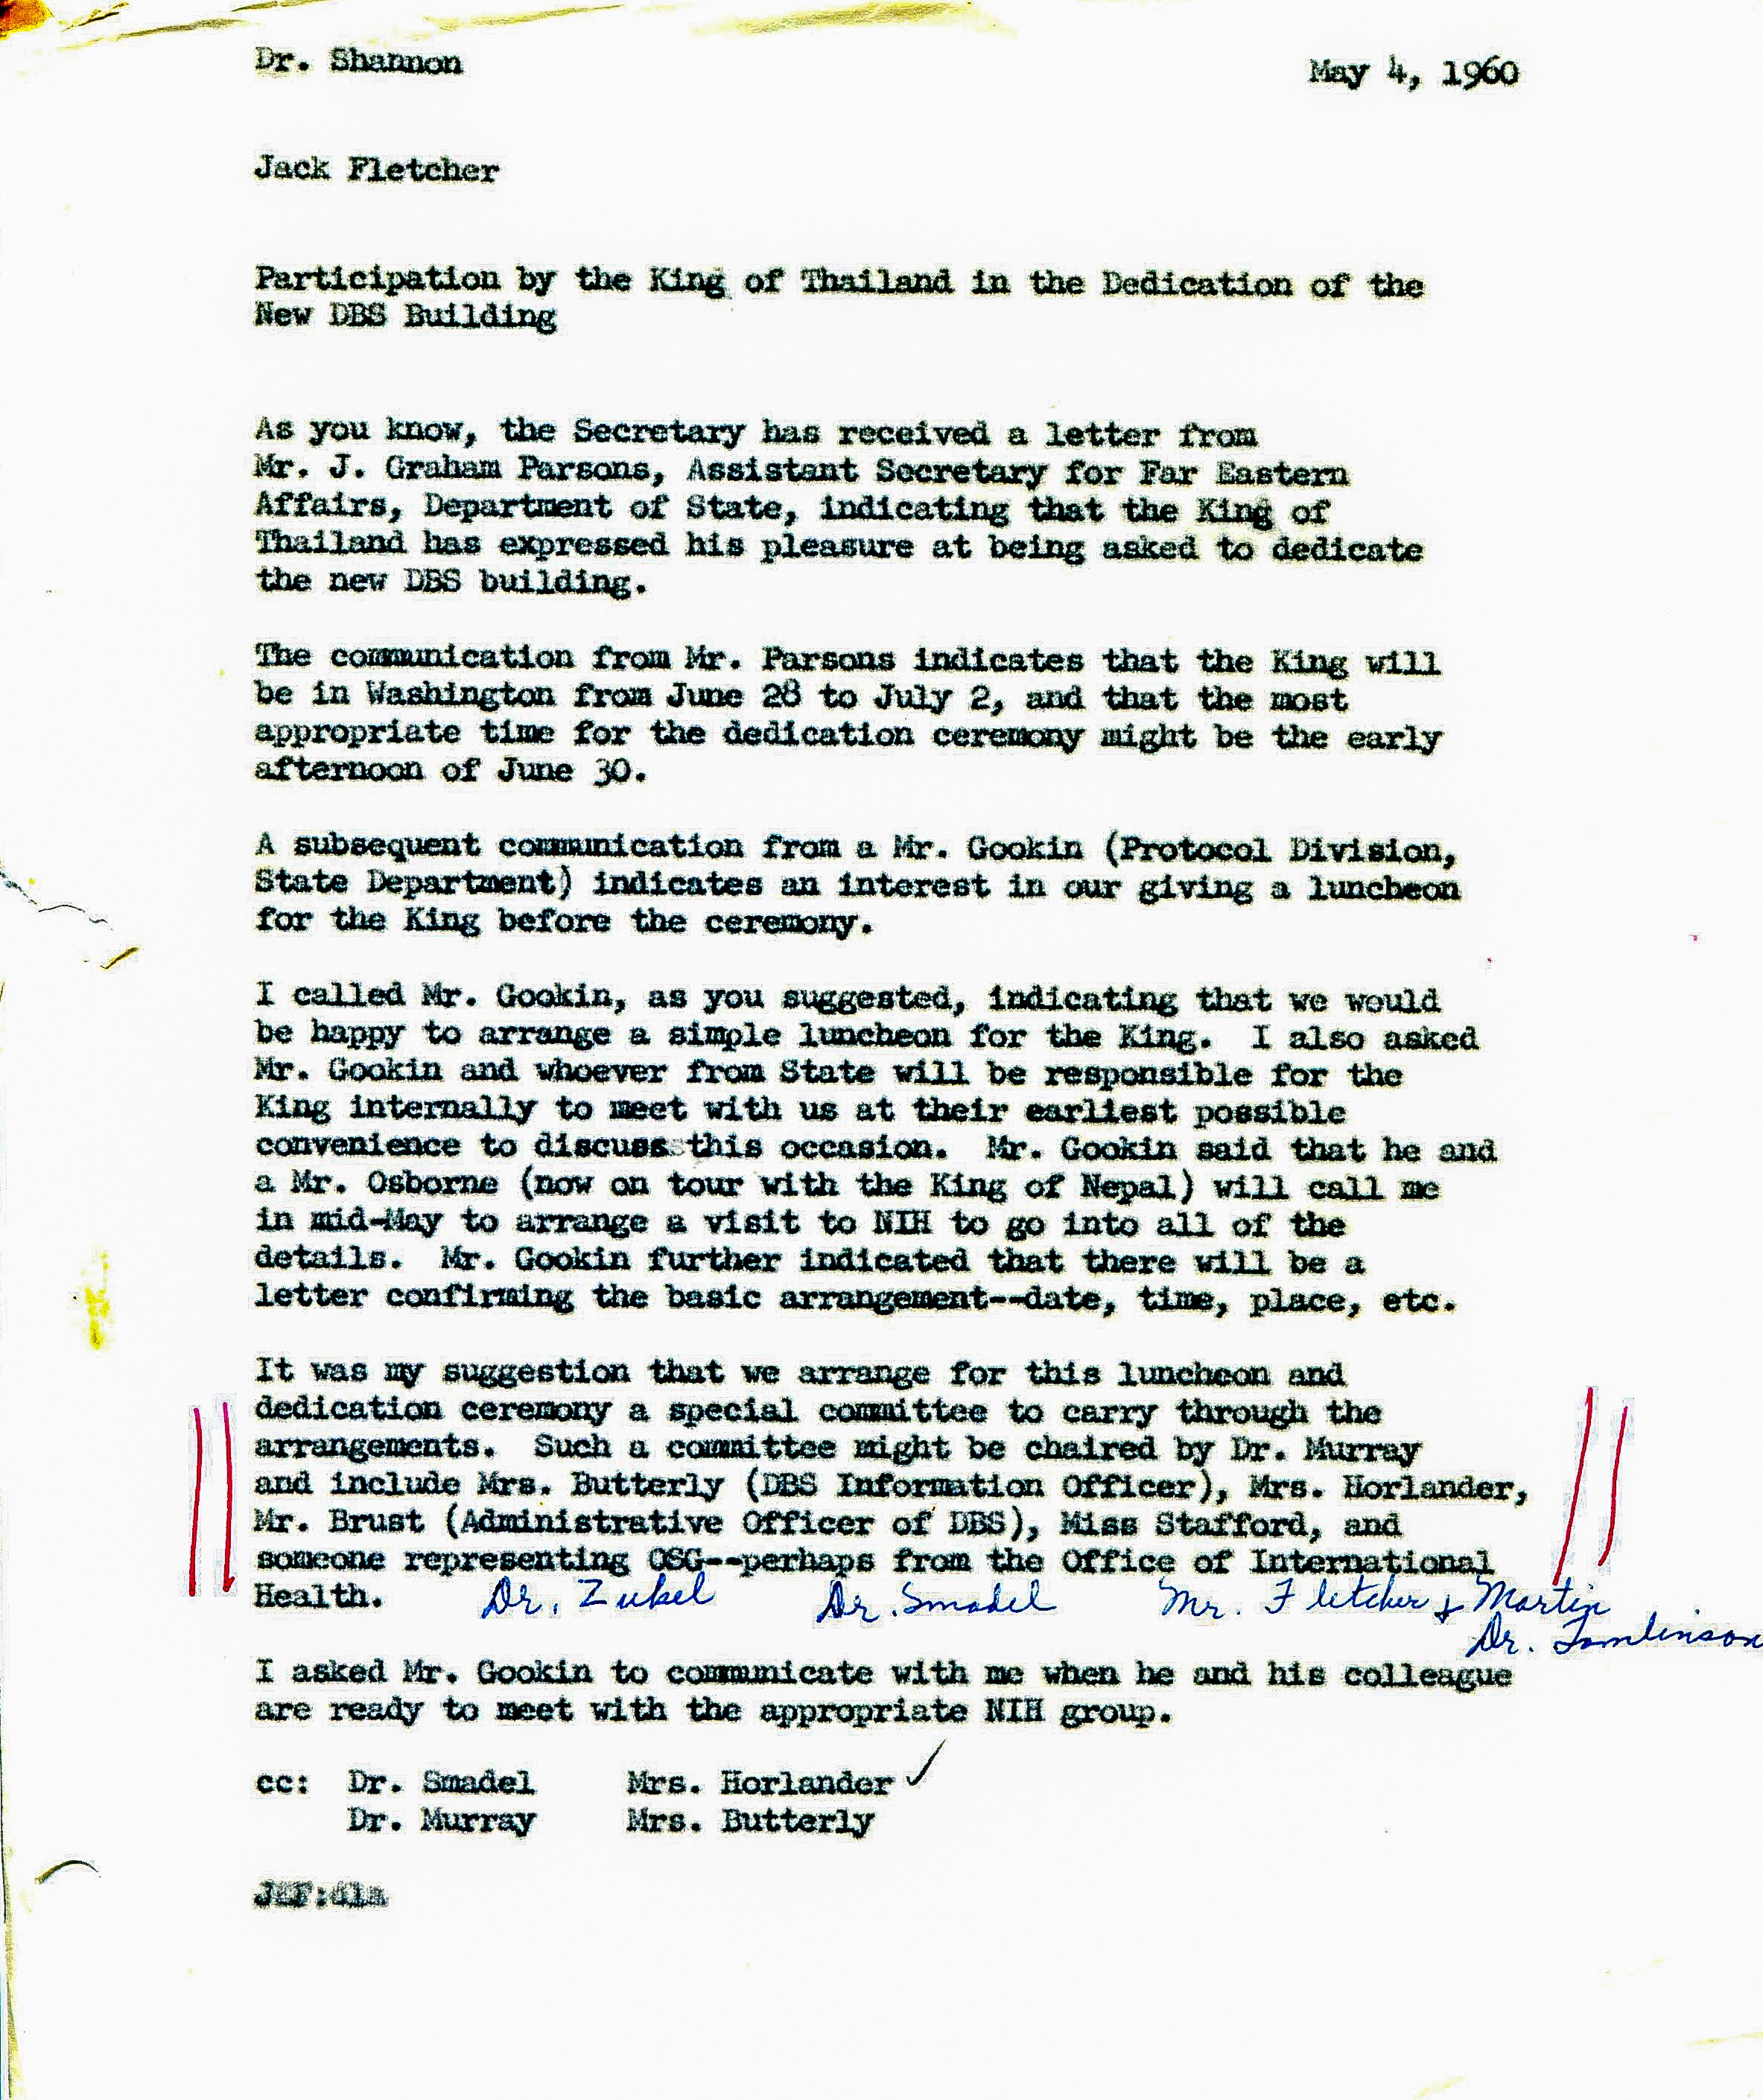 a scanned photo of a letter from 1960 preparing for the dedication ceremony luncheon for Building 29 with Arlene Butterly's name on it